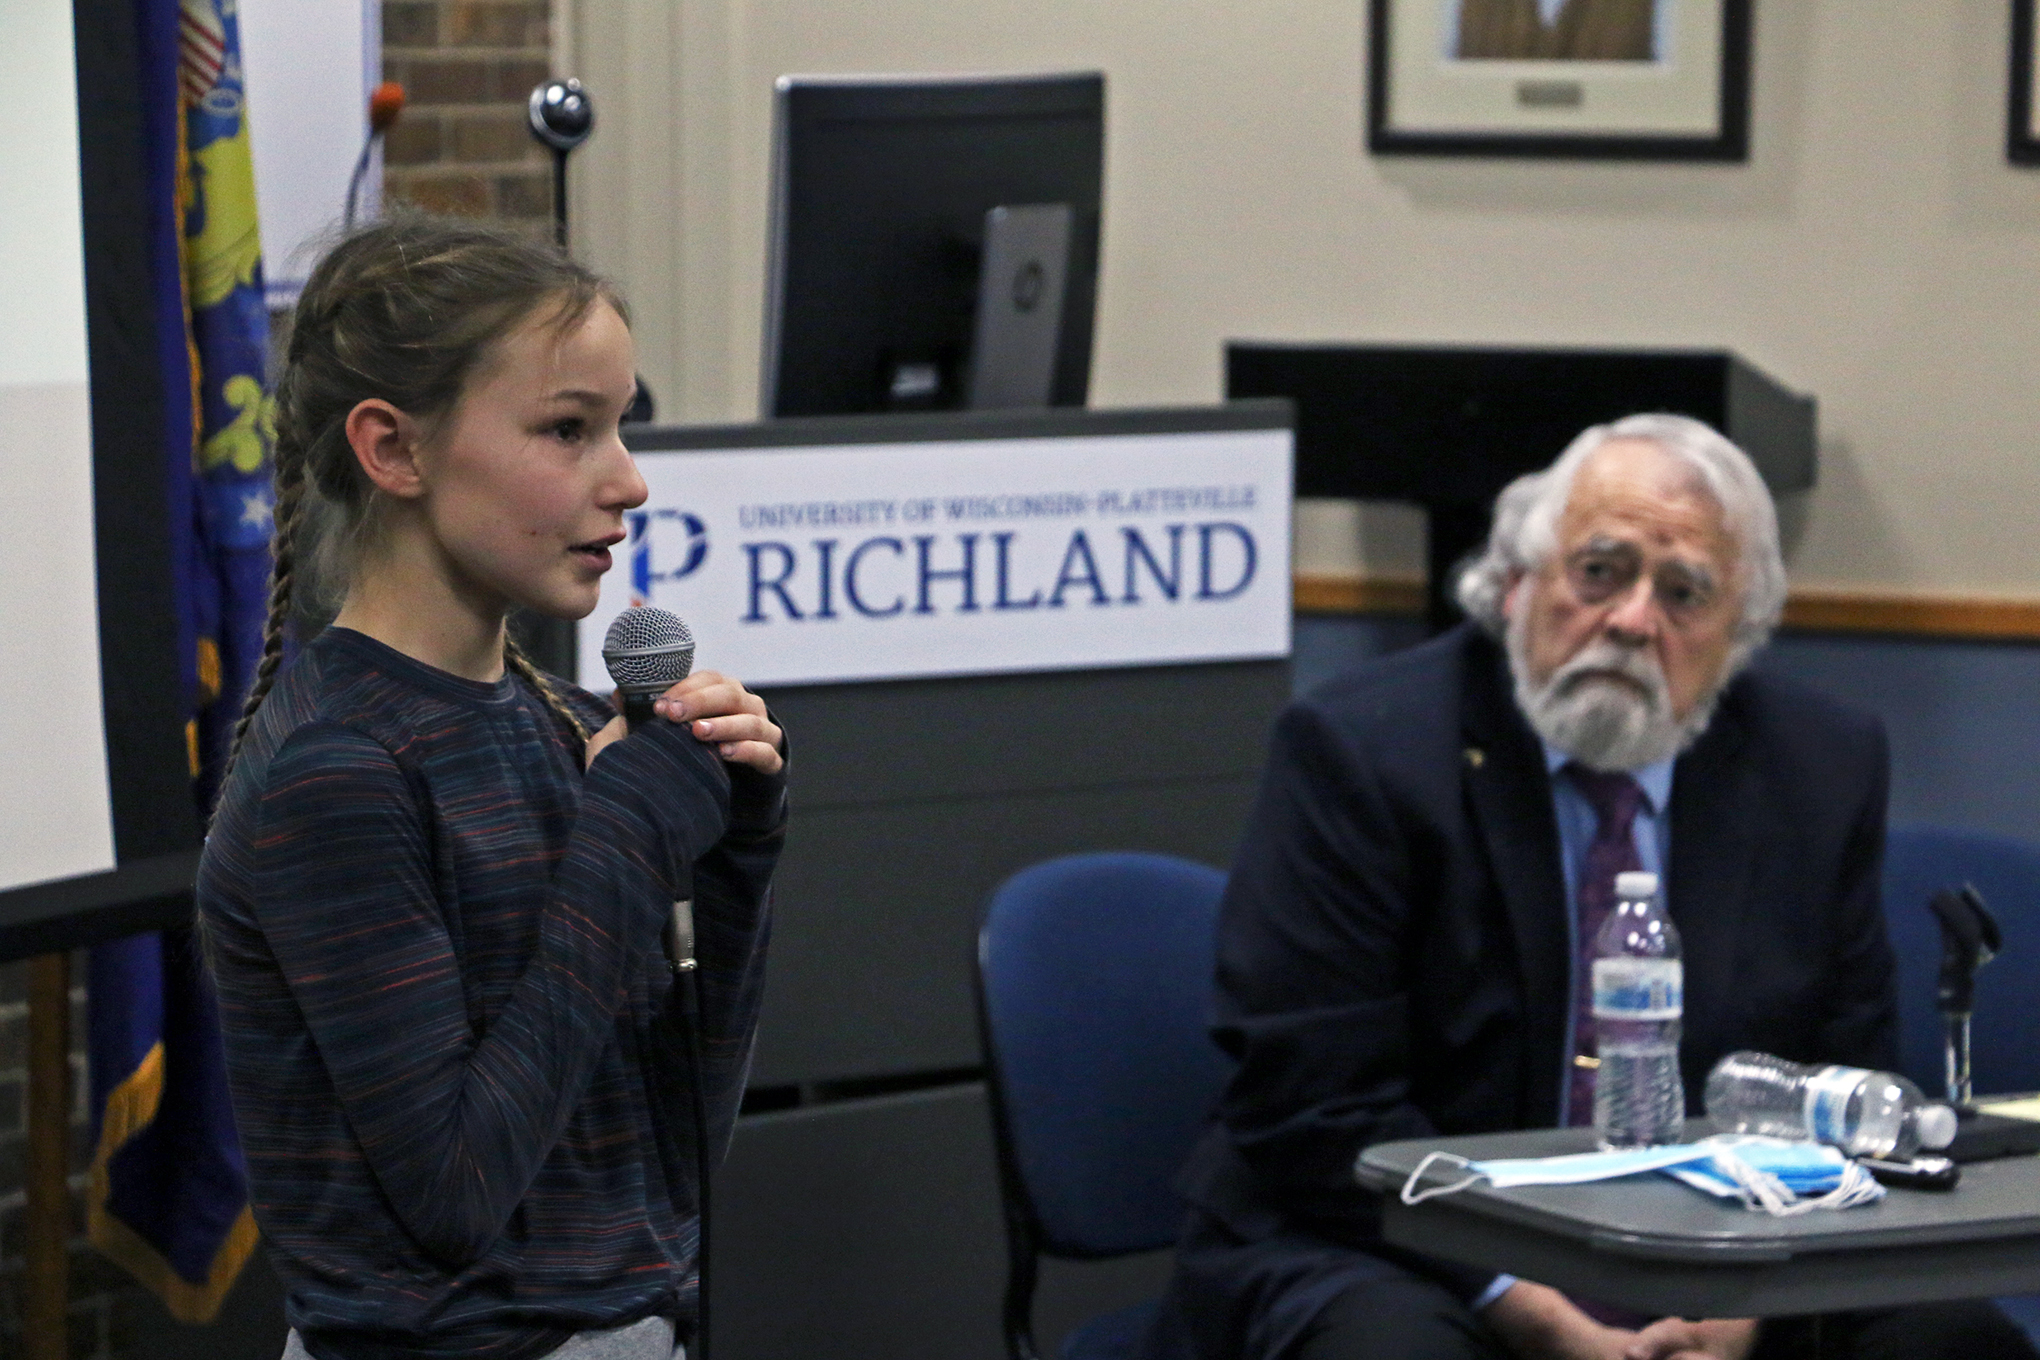 A young girl speaks into a microphone at a town hall meeting aimed at stopping the planned end of college classes at UW-Platteville Richland